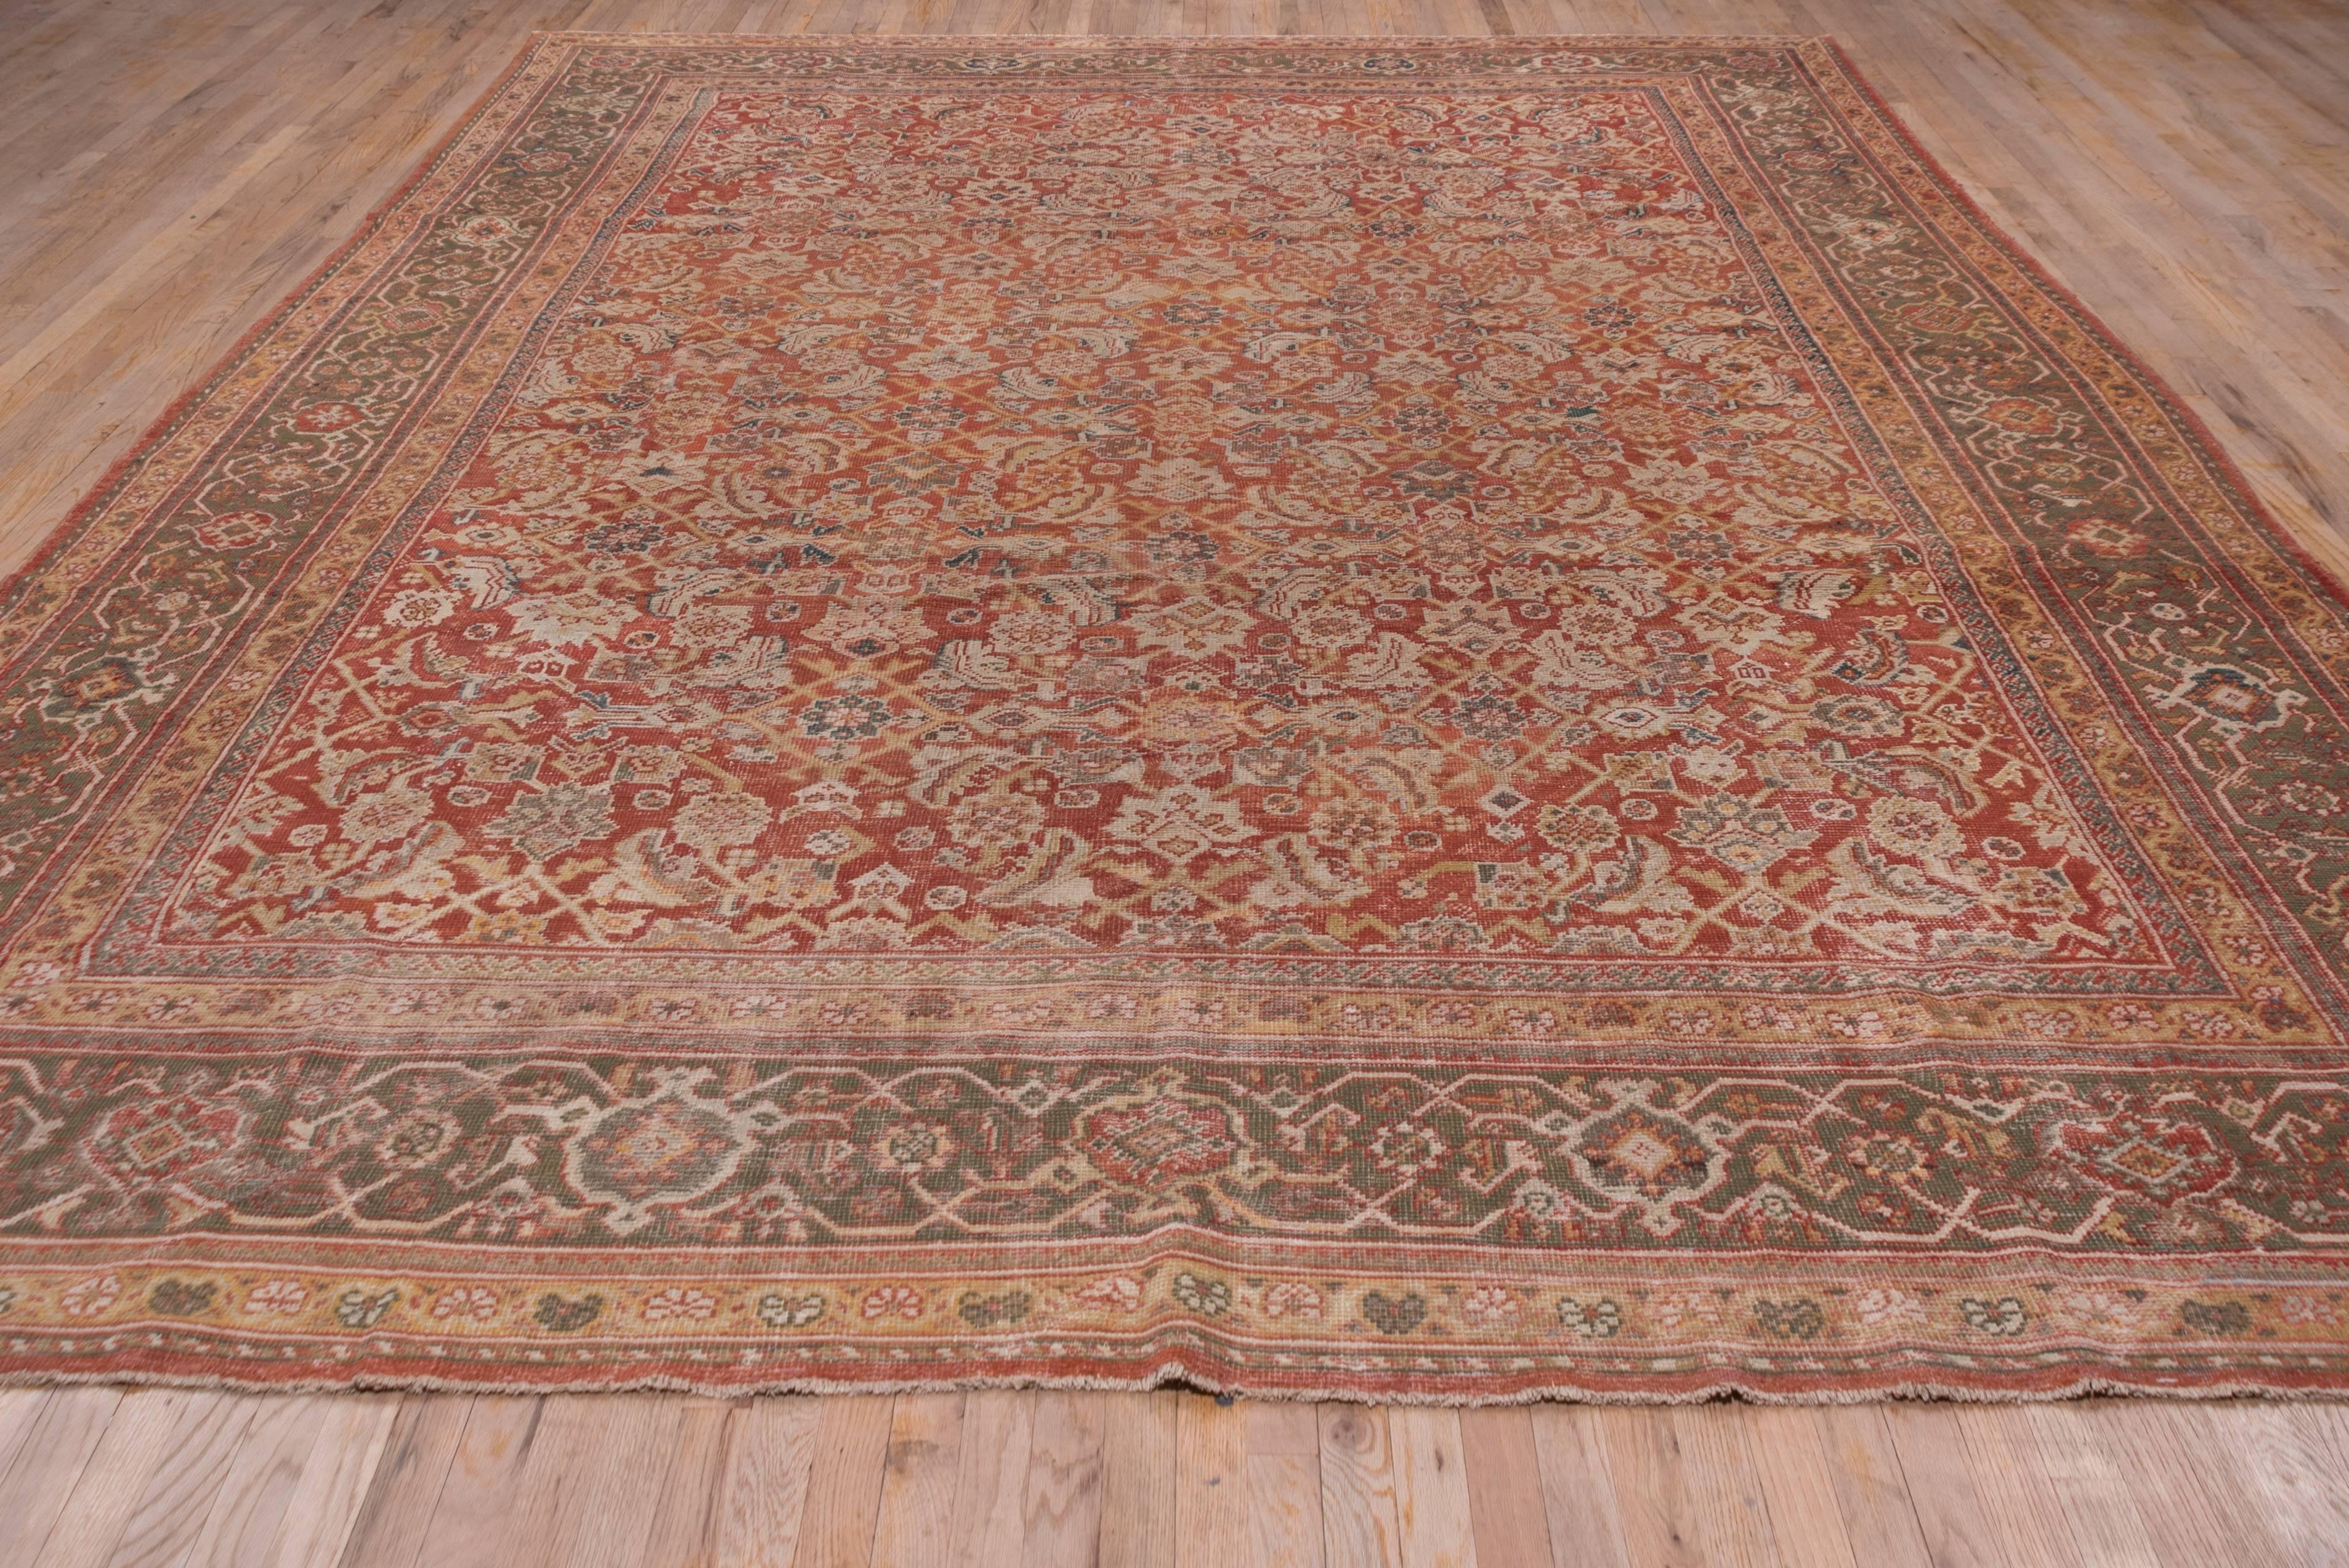 A fairly large-scale all-over Herati 'fish' leaf, open diamond, rosette and palmette pattern in light straw ans ivory decorates the warm madder red field of this west Persian rustic carpet. Tawny gold fan palmette minors flank the angular turtle